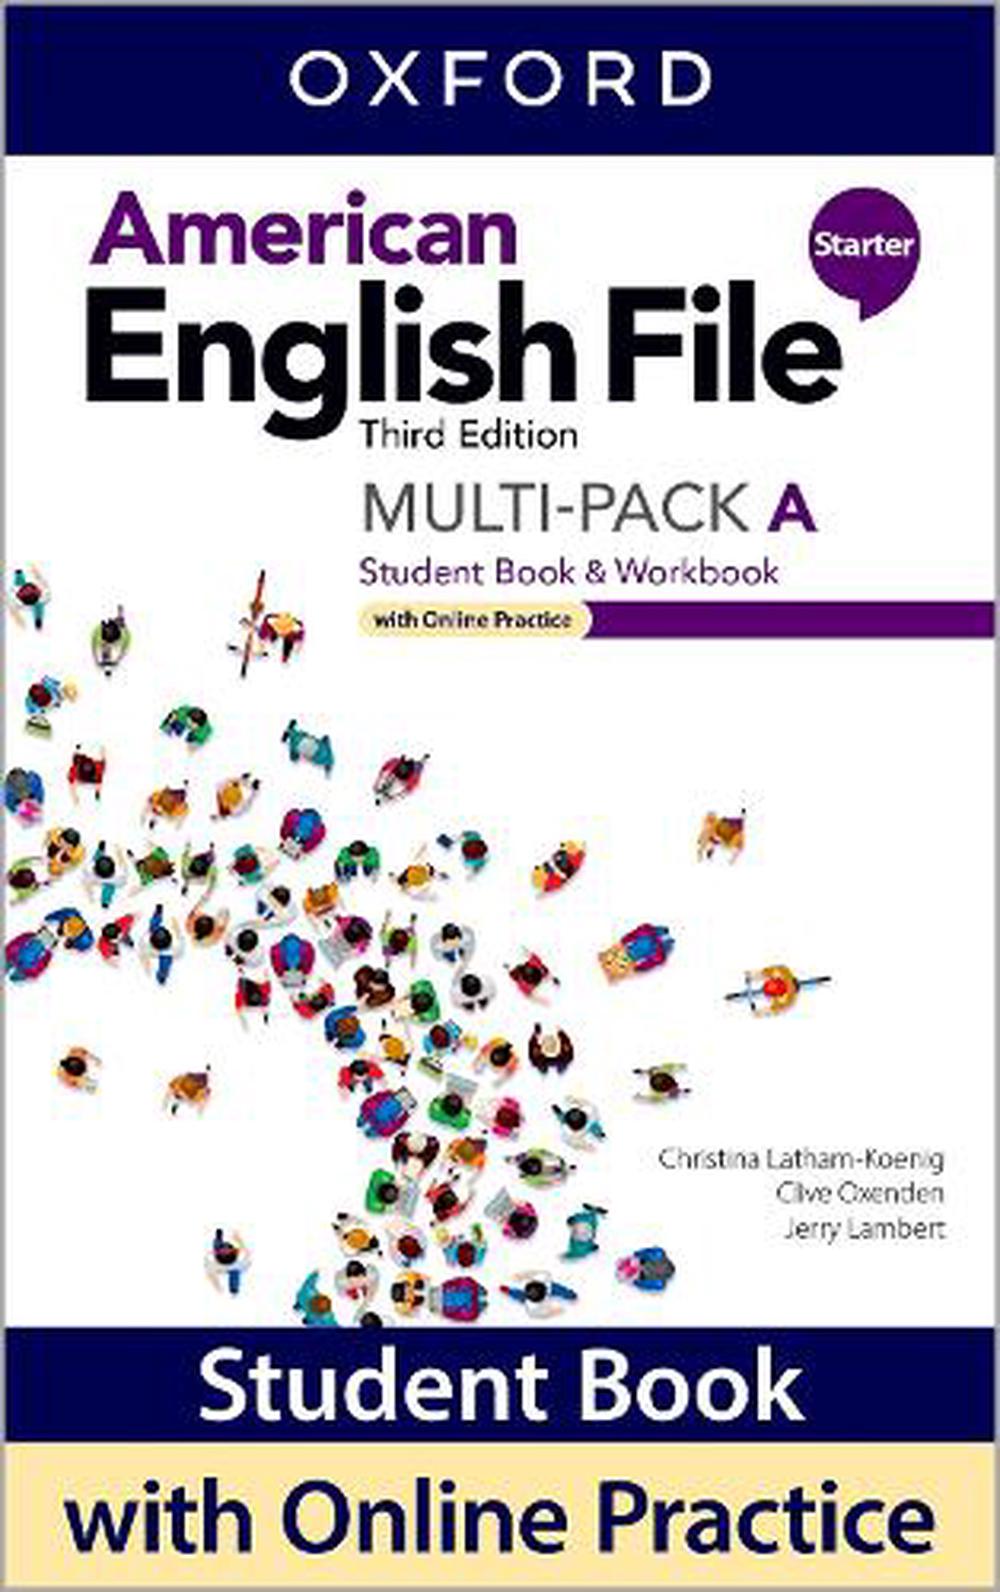 with　Multi-Pack　9780194906029　Starter:　American　Oxenden,　Practice　Merchandise,　by　English　Book　at　Online　File:　The　Nile　Student　online　Clive　Book/Workbook　A　Buy